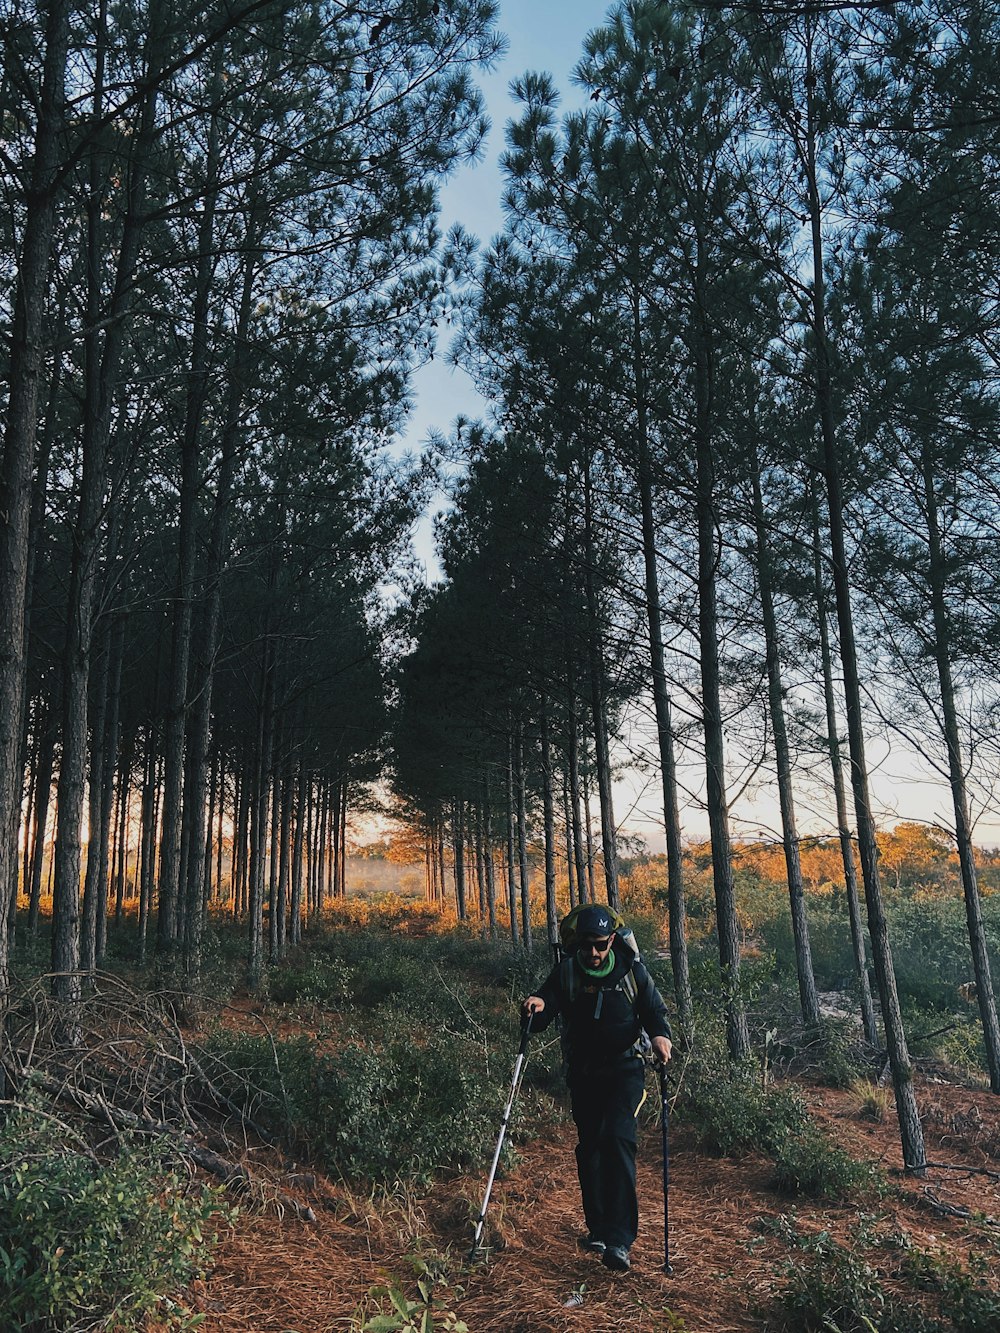 a person with a helmet and poles walking on a trail in the woods